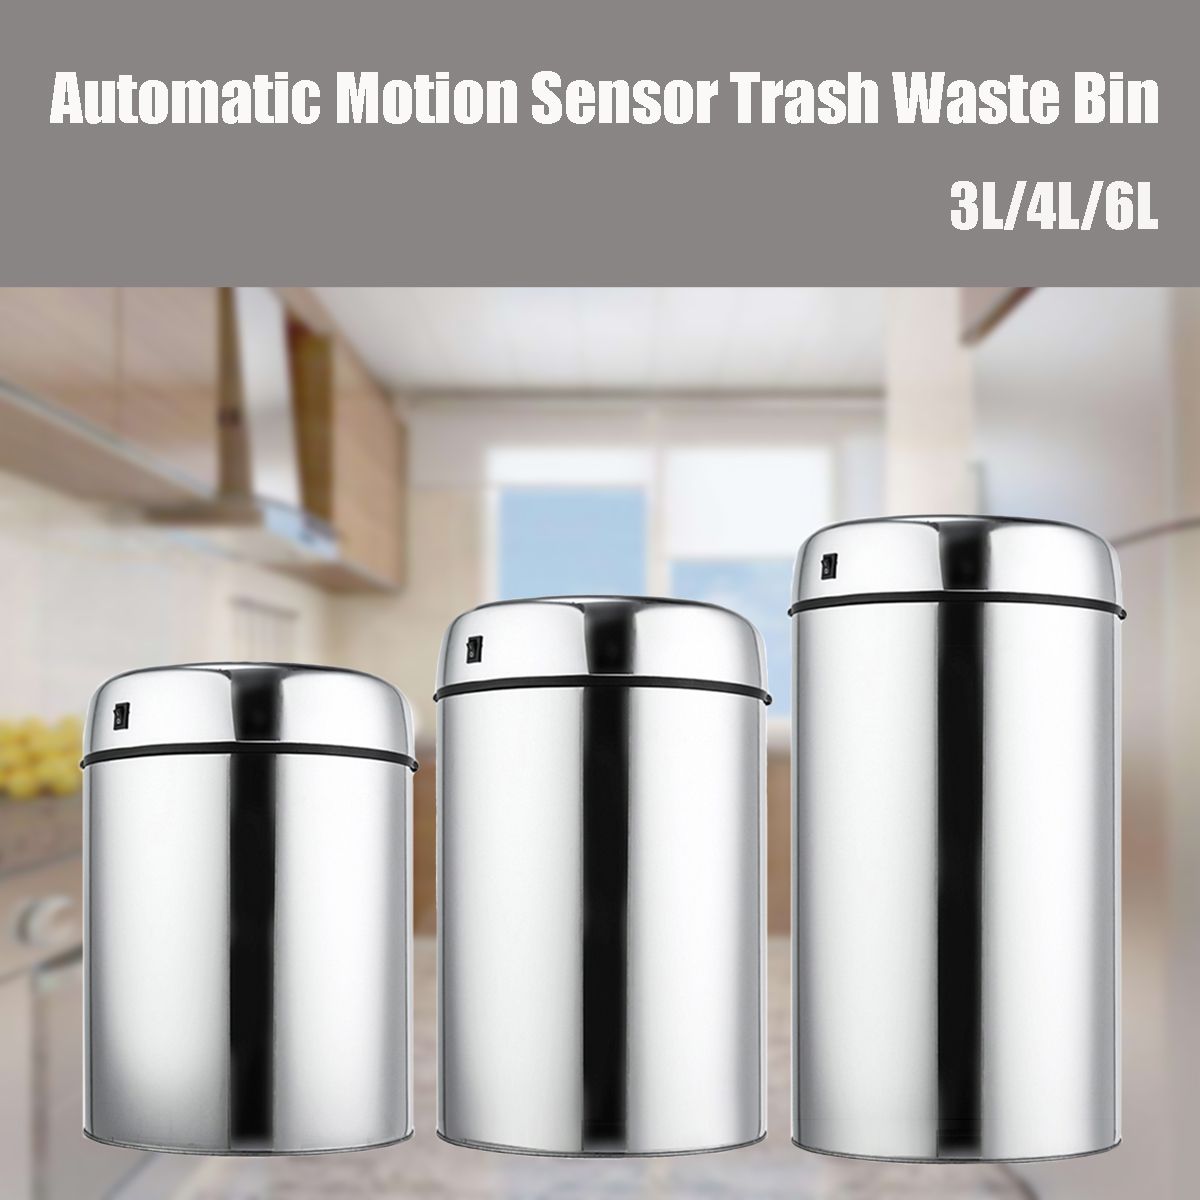 346L-Stainless-Steel-Round-Sensor-Trash-Can-Touchless-Motion-Automatic-Opening-Recycler-Waste-Bins-1320332